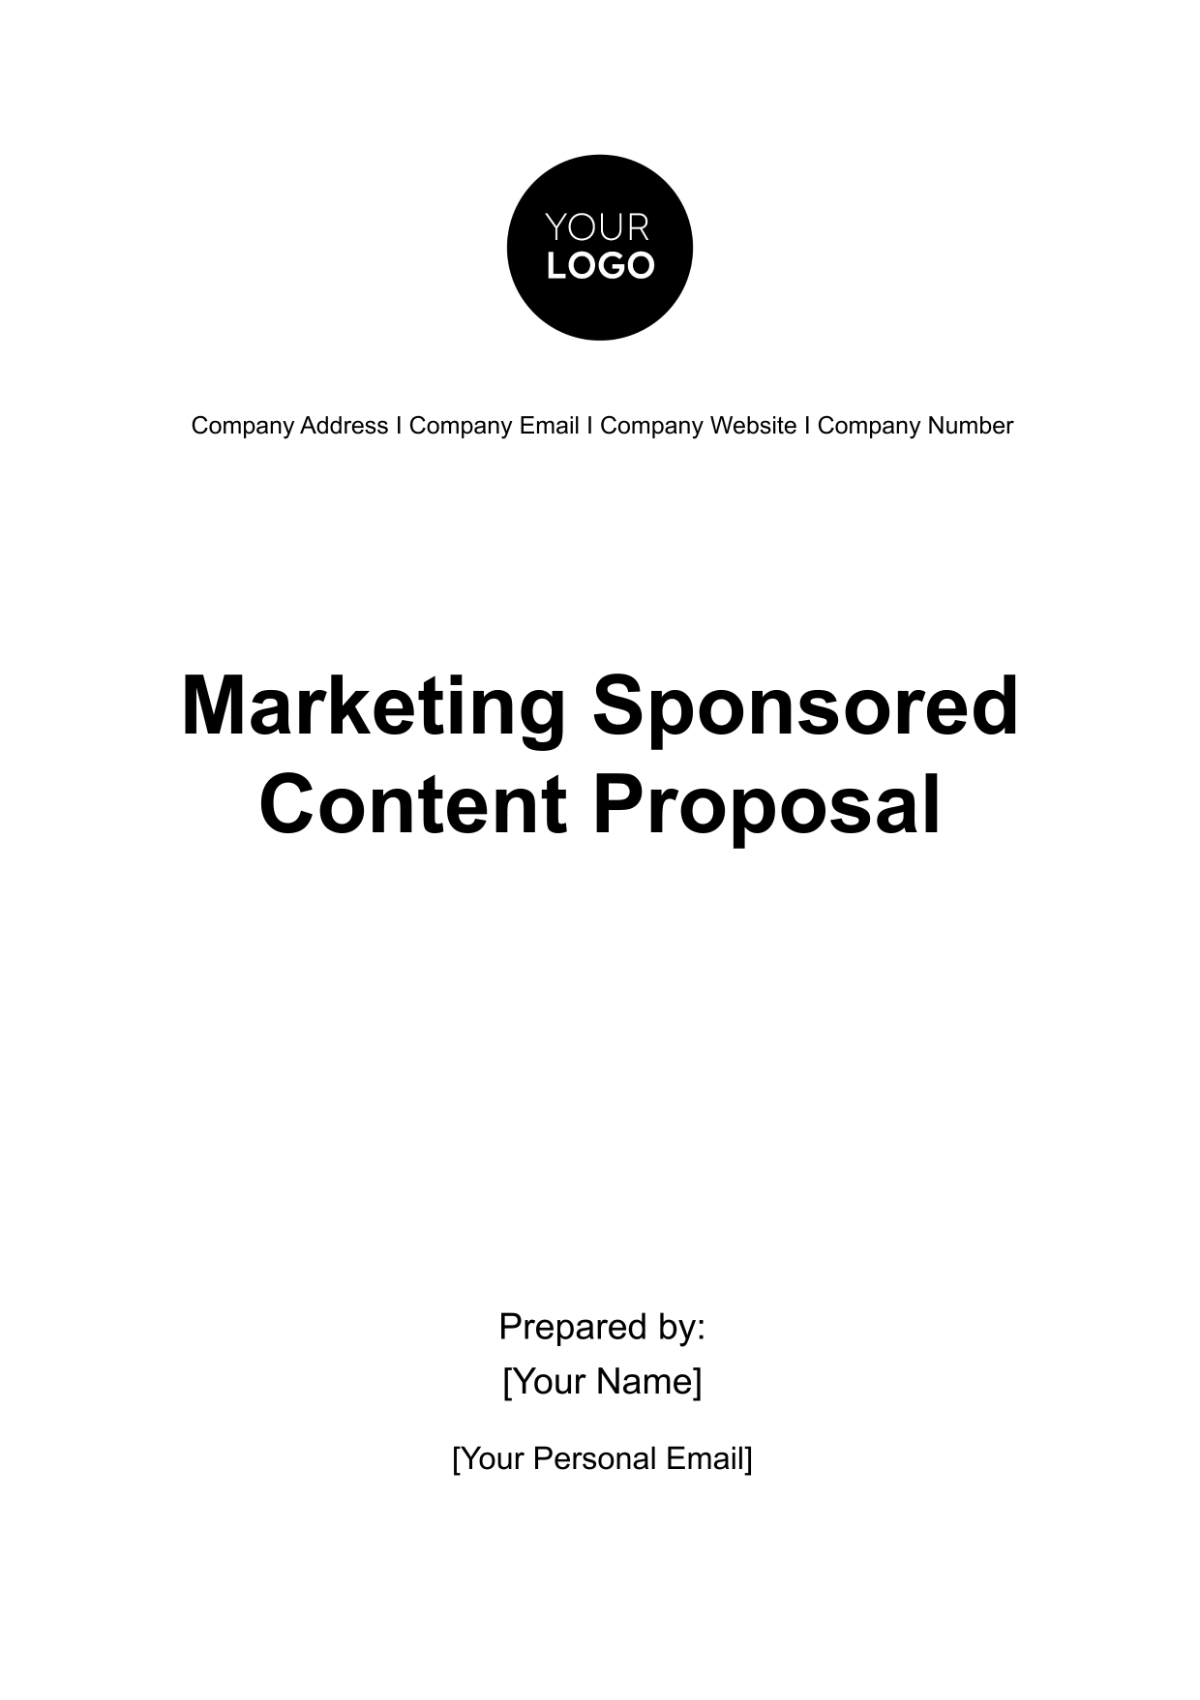 Free Marketing Sponsored Content Proposal Template